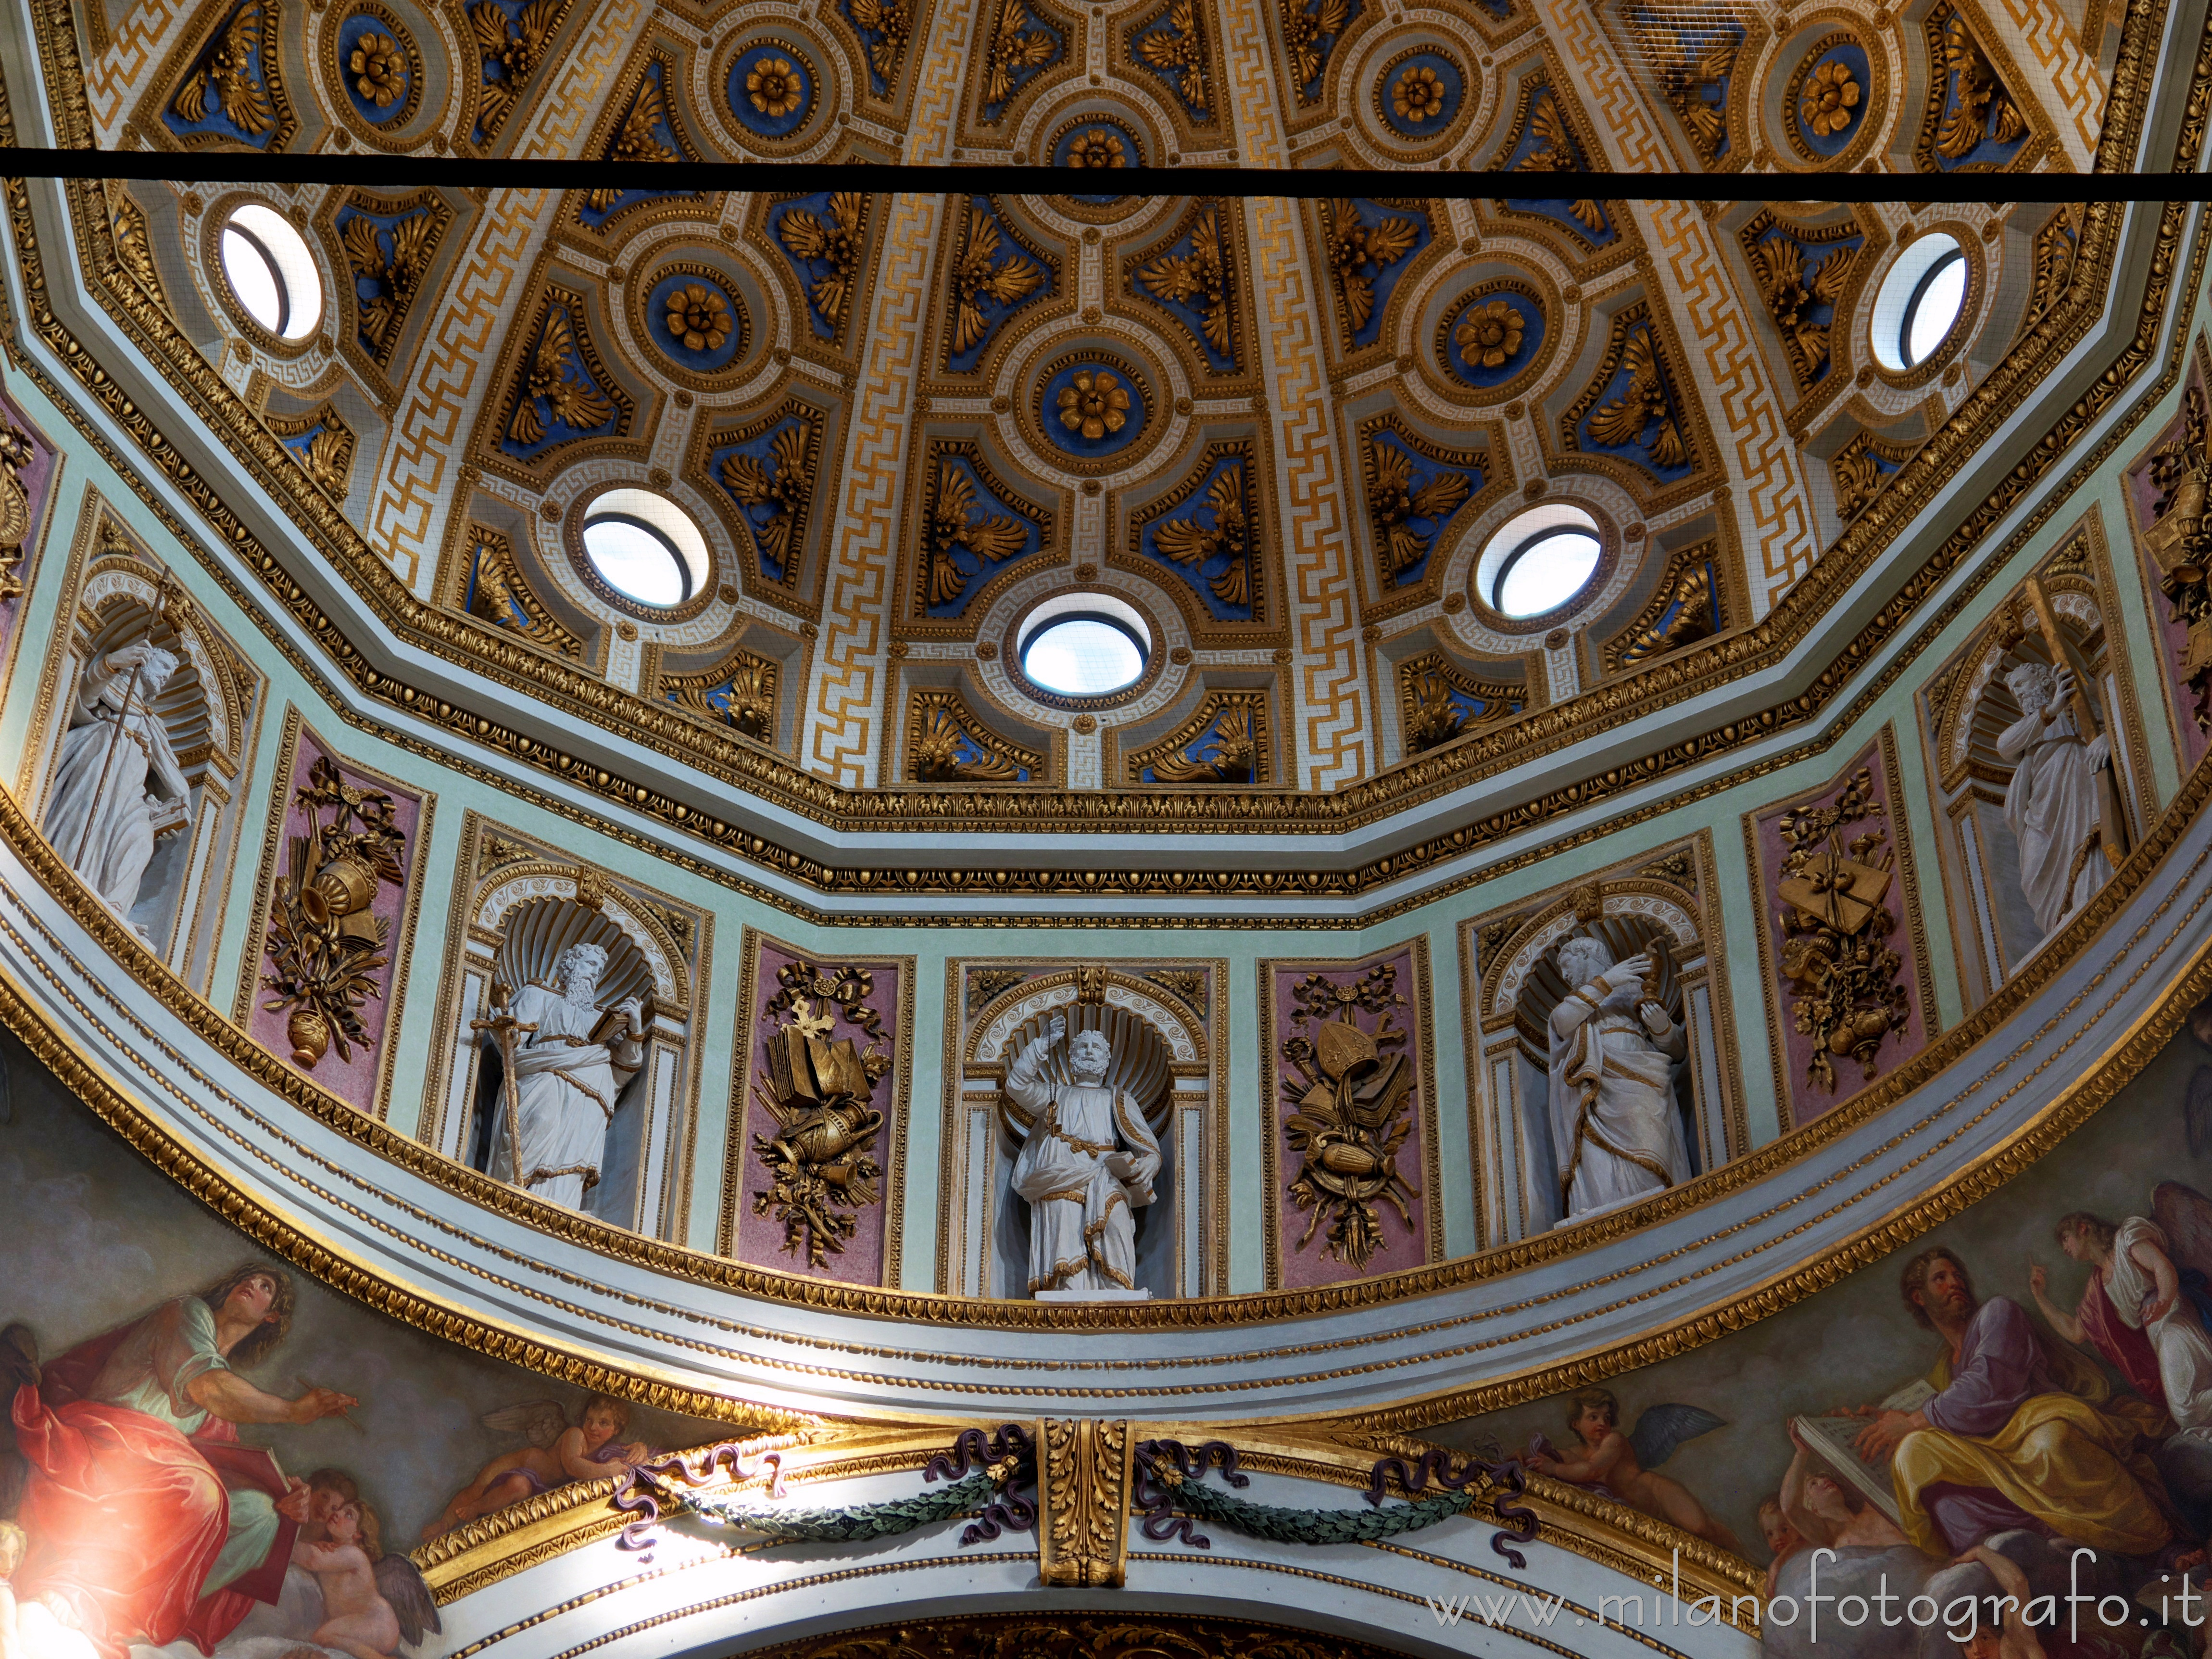 Milan (Italy): Statues of the apostles at the base of the dome of the Church of Santa Maria dei Miracoli - Milan (Italy)